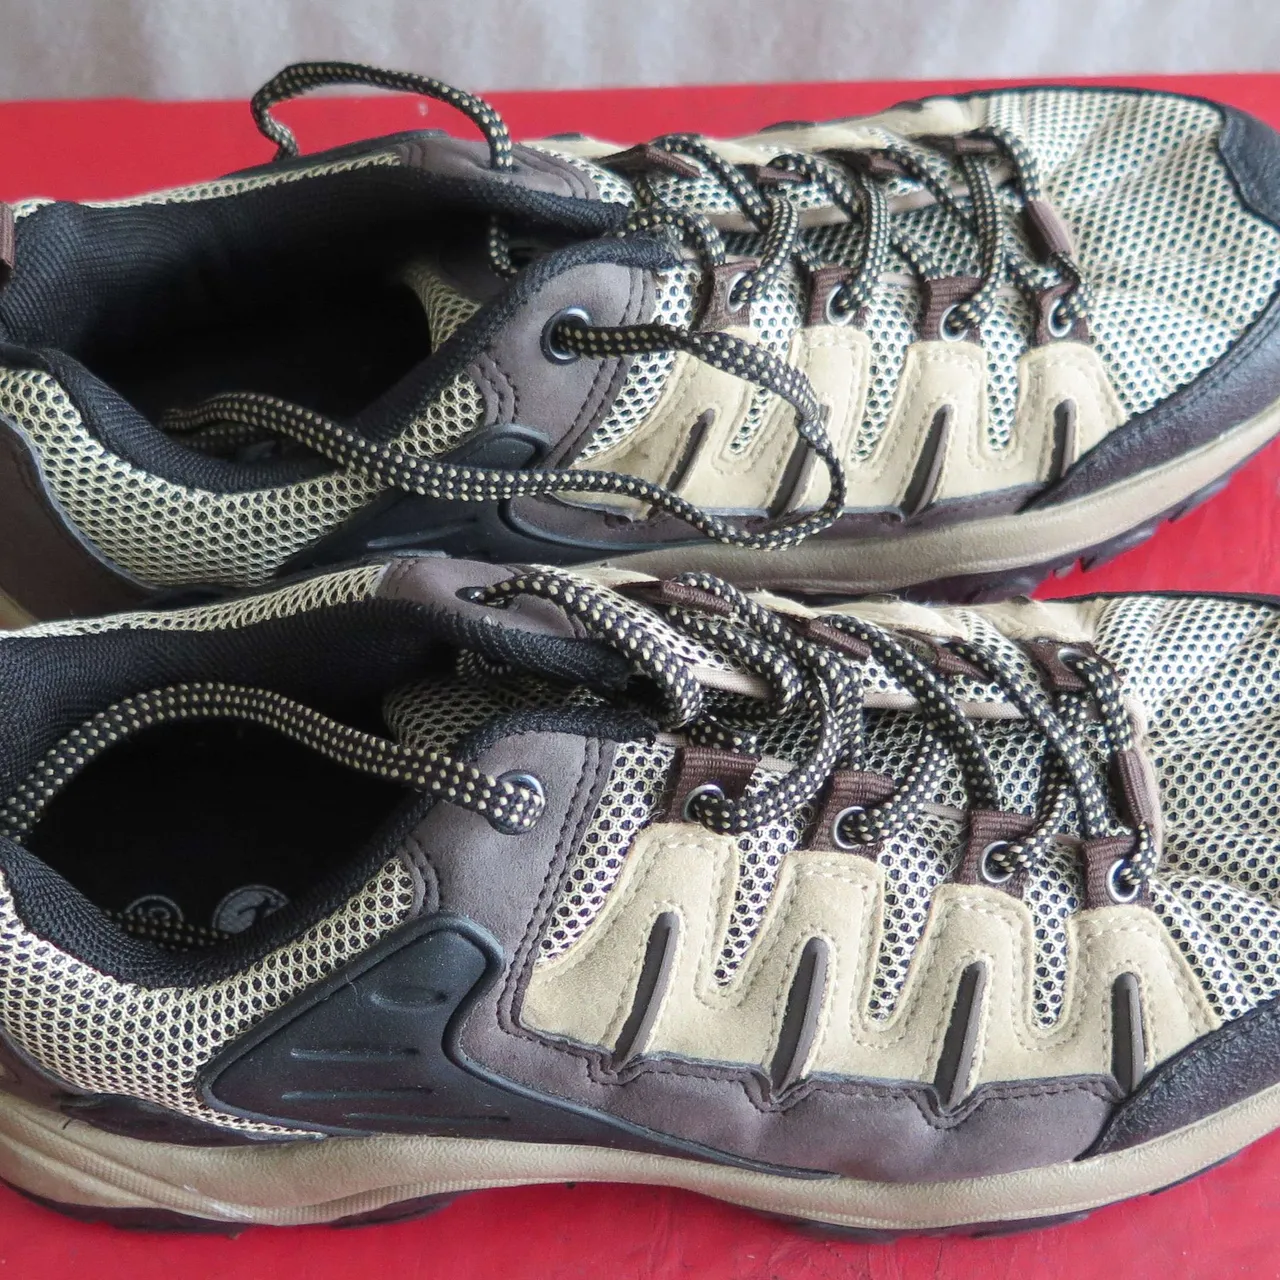 size 6.5 (European 40) sneakers Cliff NEW UNUSED NYT photo 1